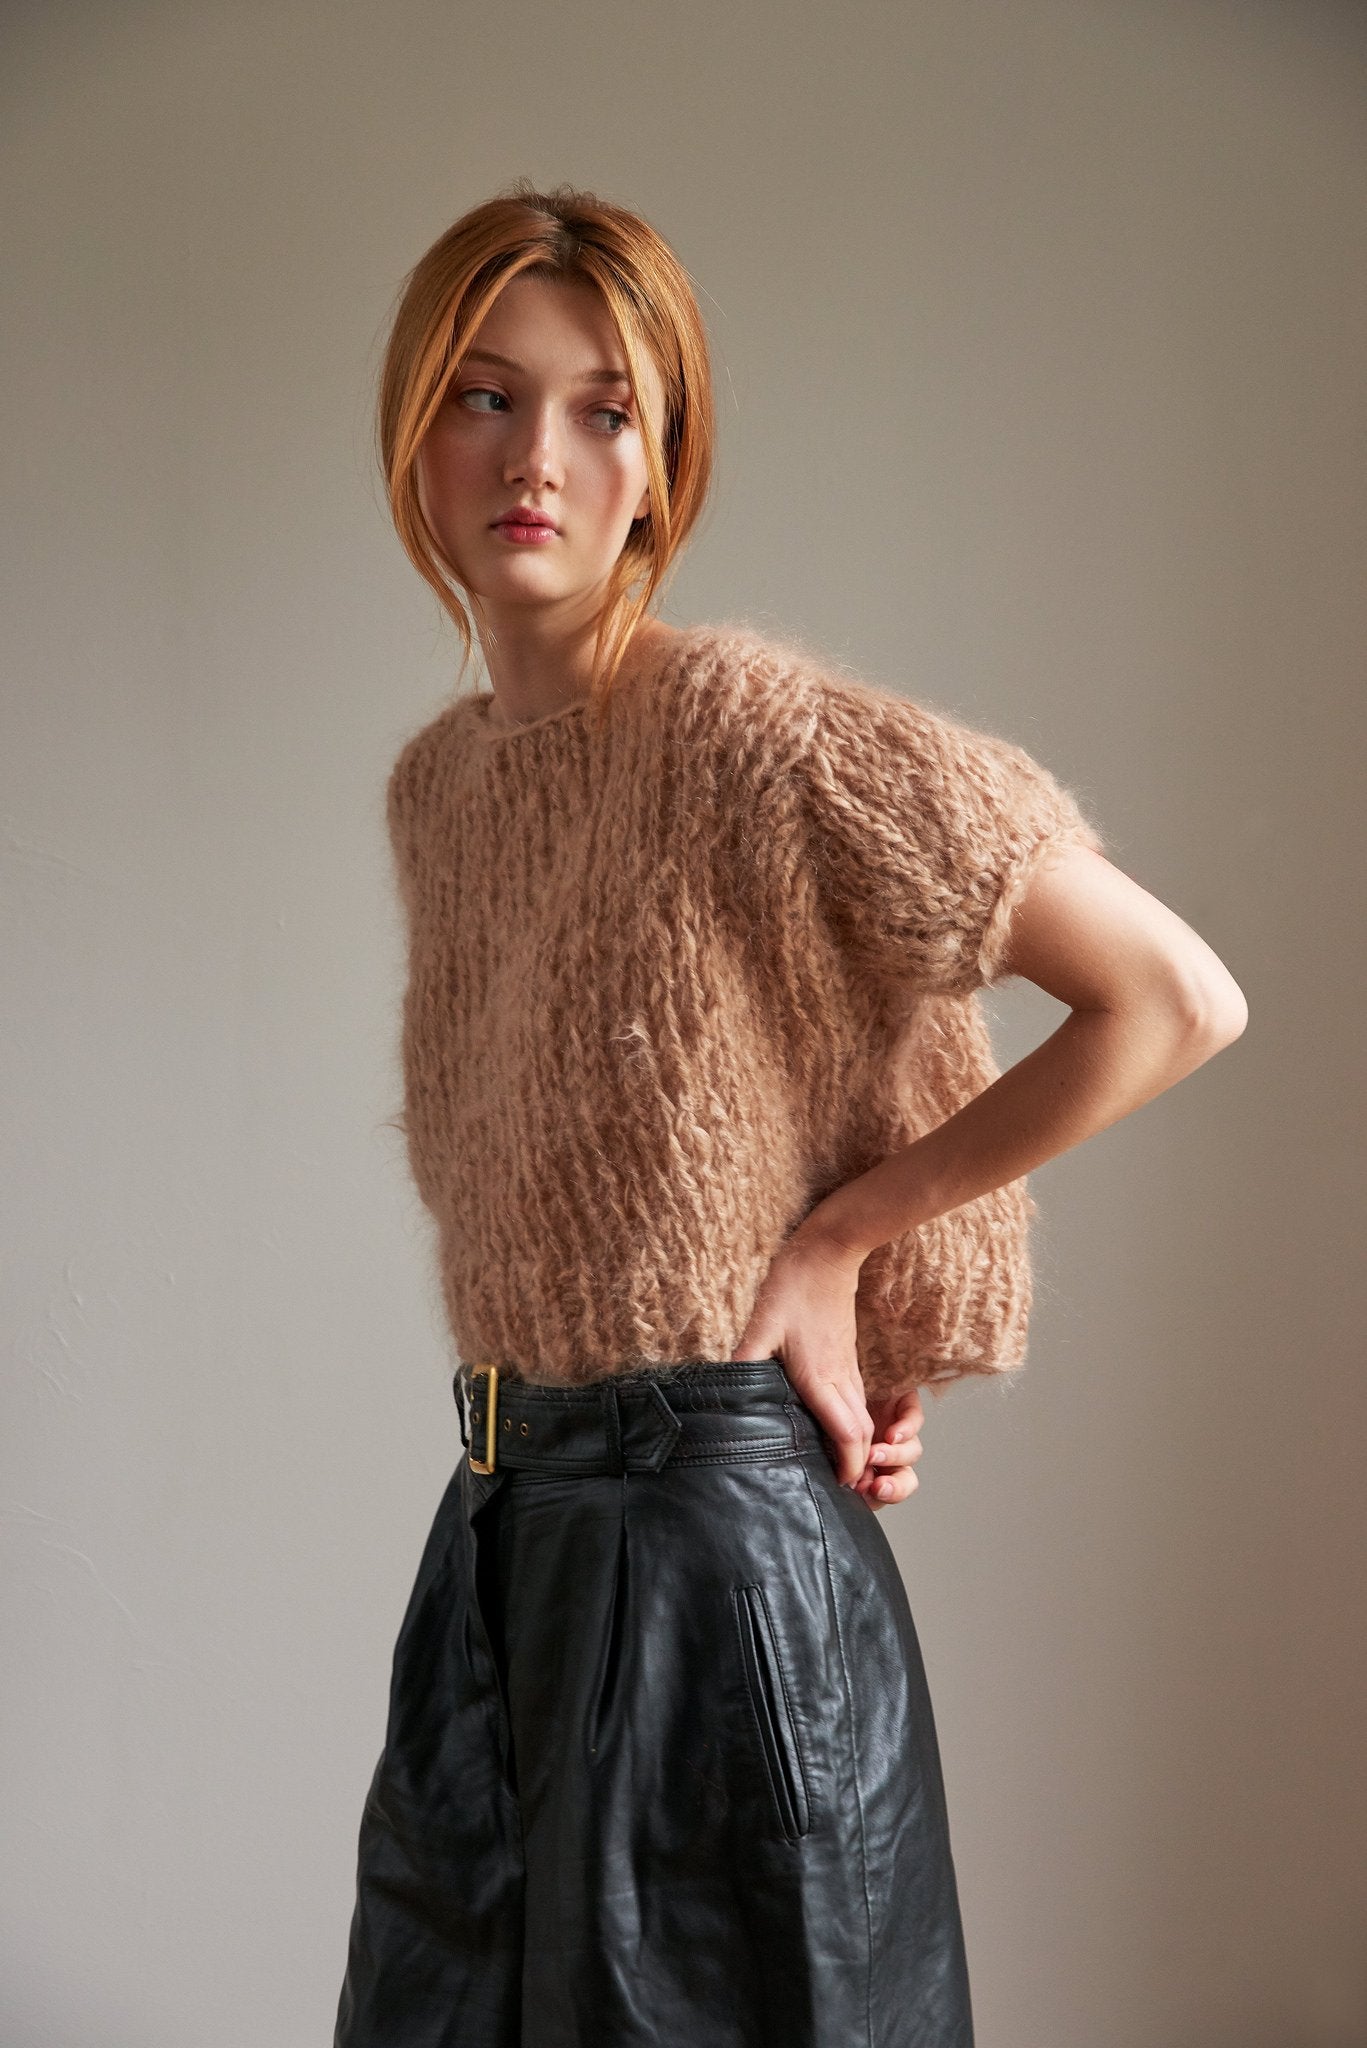 Puff Sleeve Top PATTERN- Mohair So Soft